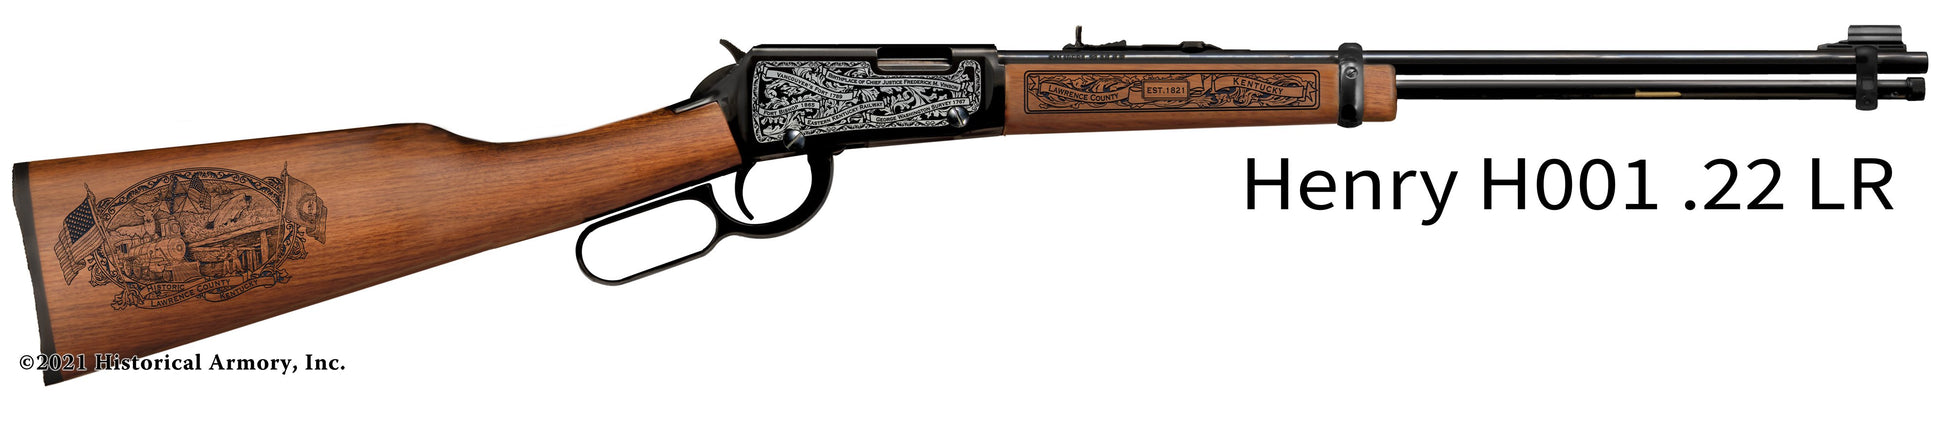 Lawrence County Kentucky Engraved Henry H001 Rifle